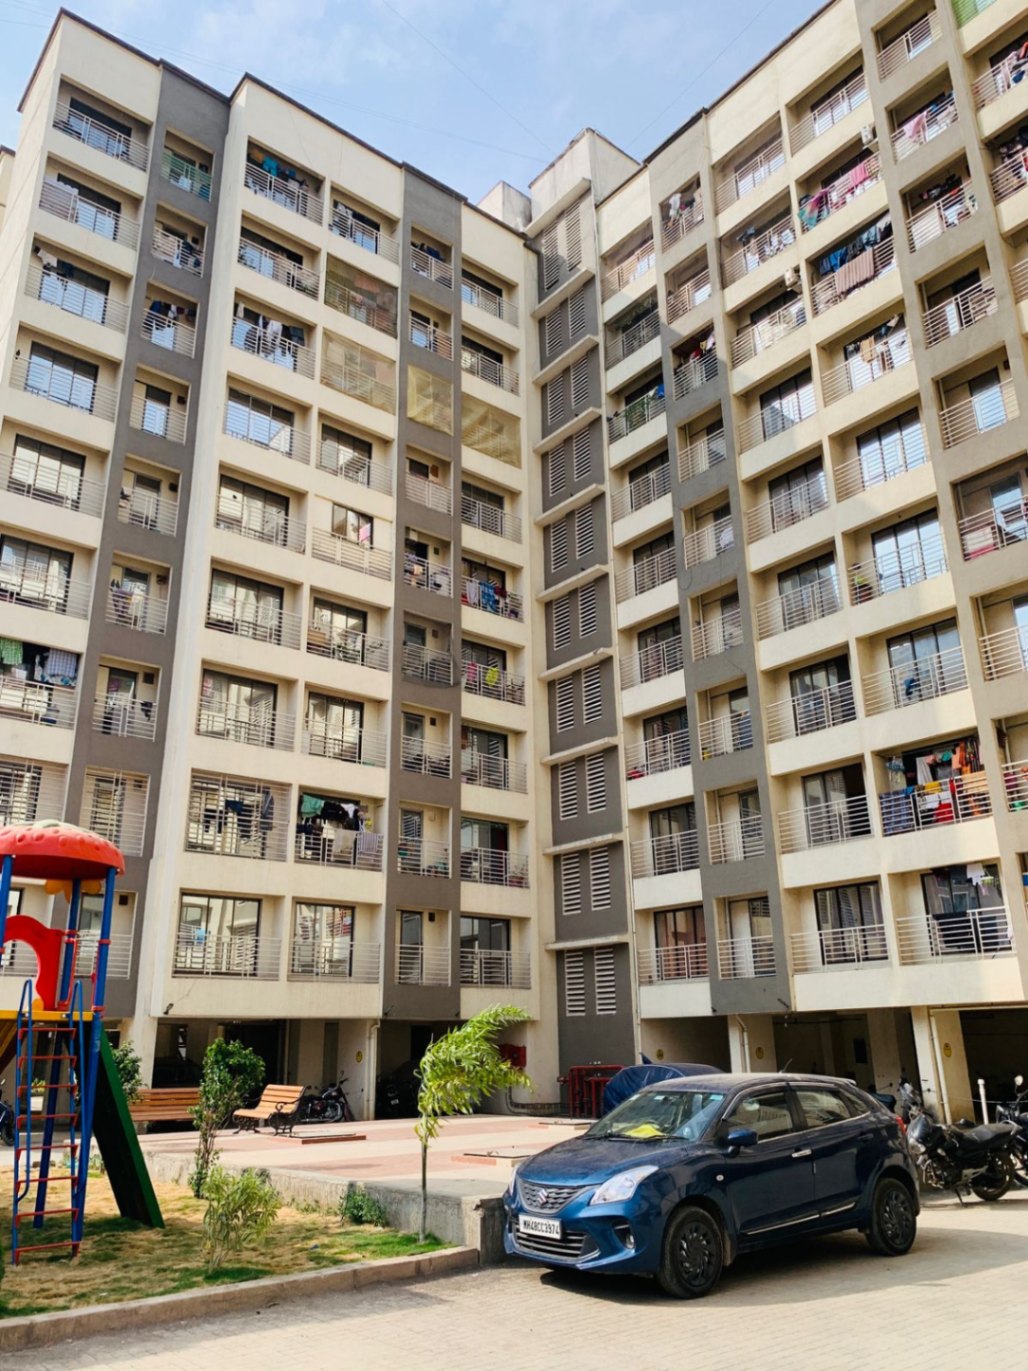 1 Bed/ 1 Bath Rent Apartment/ Flat; 472 sq. ft. carpet area, UnFurnished for rent @vasai east